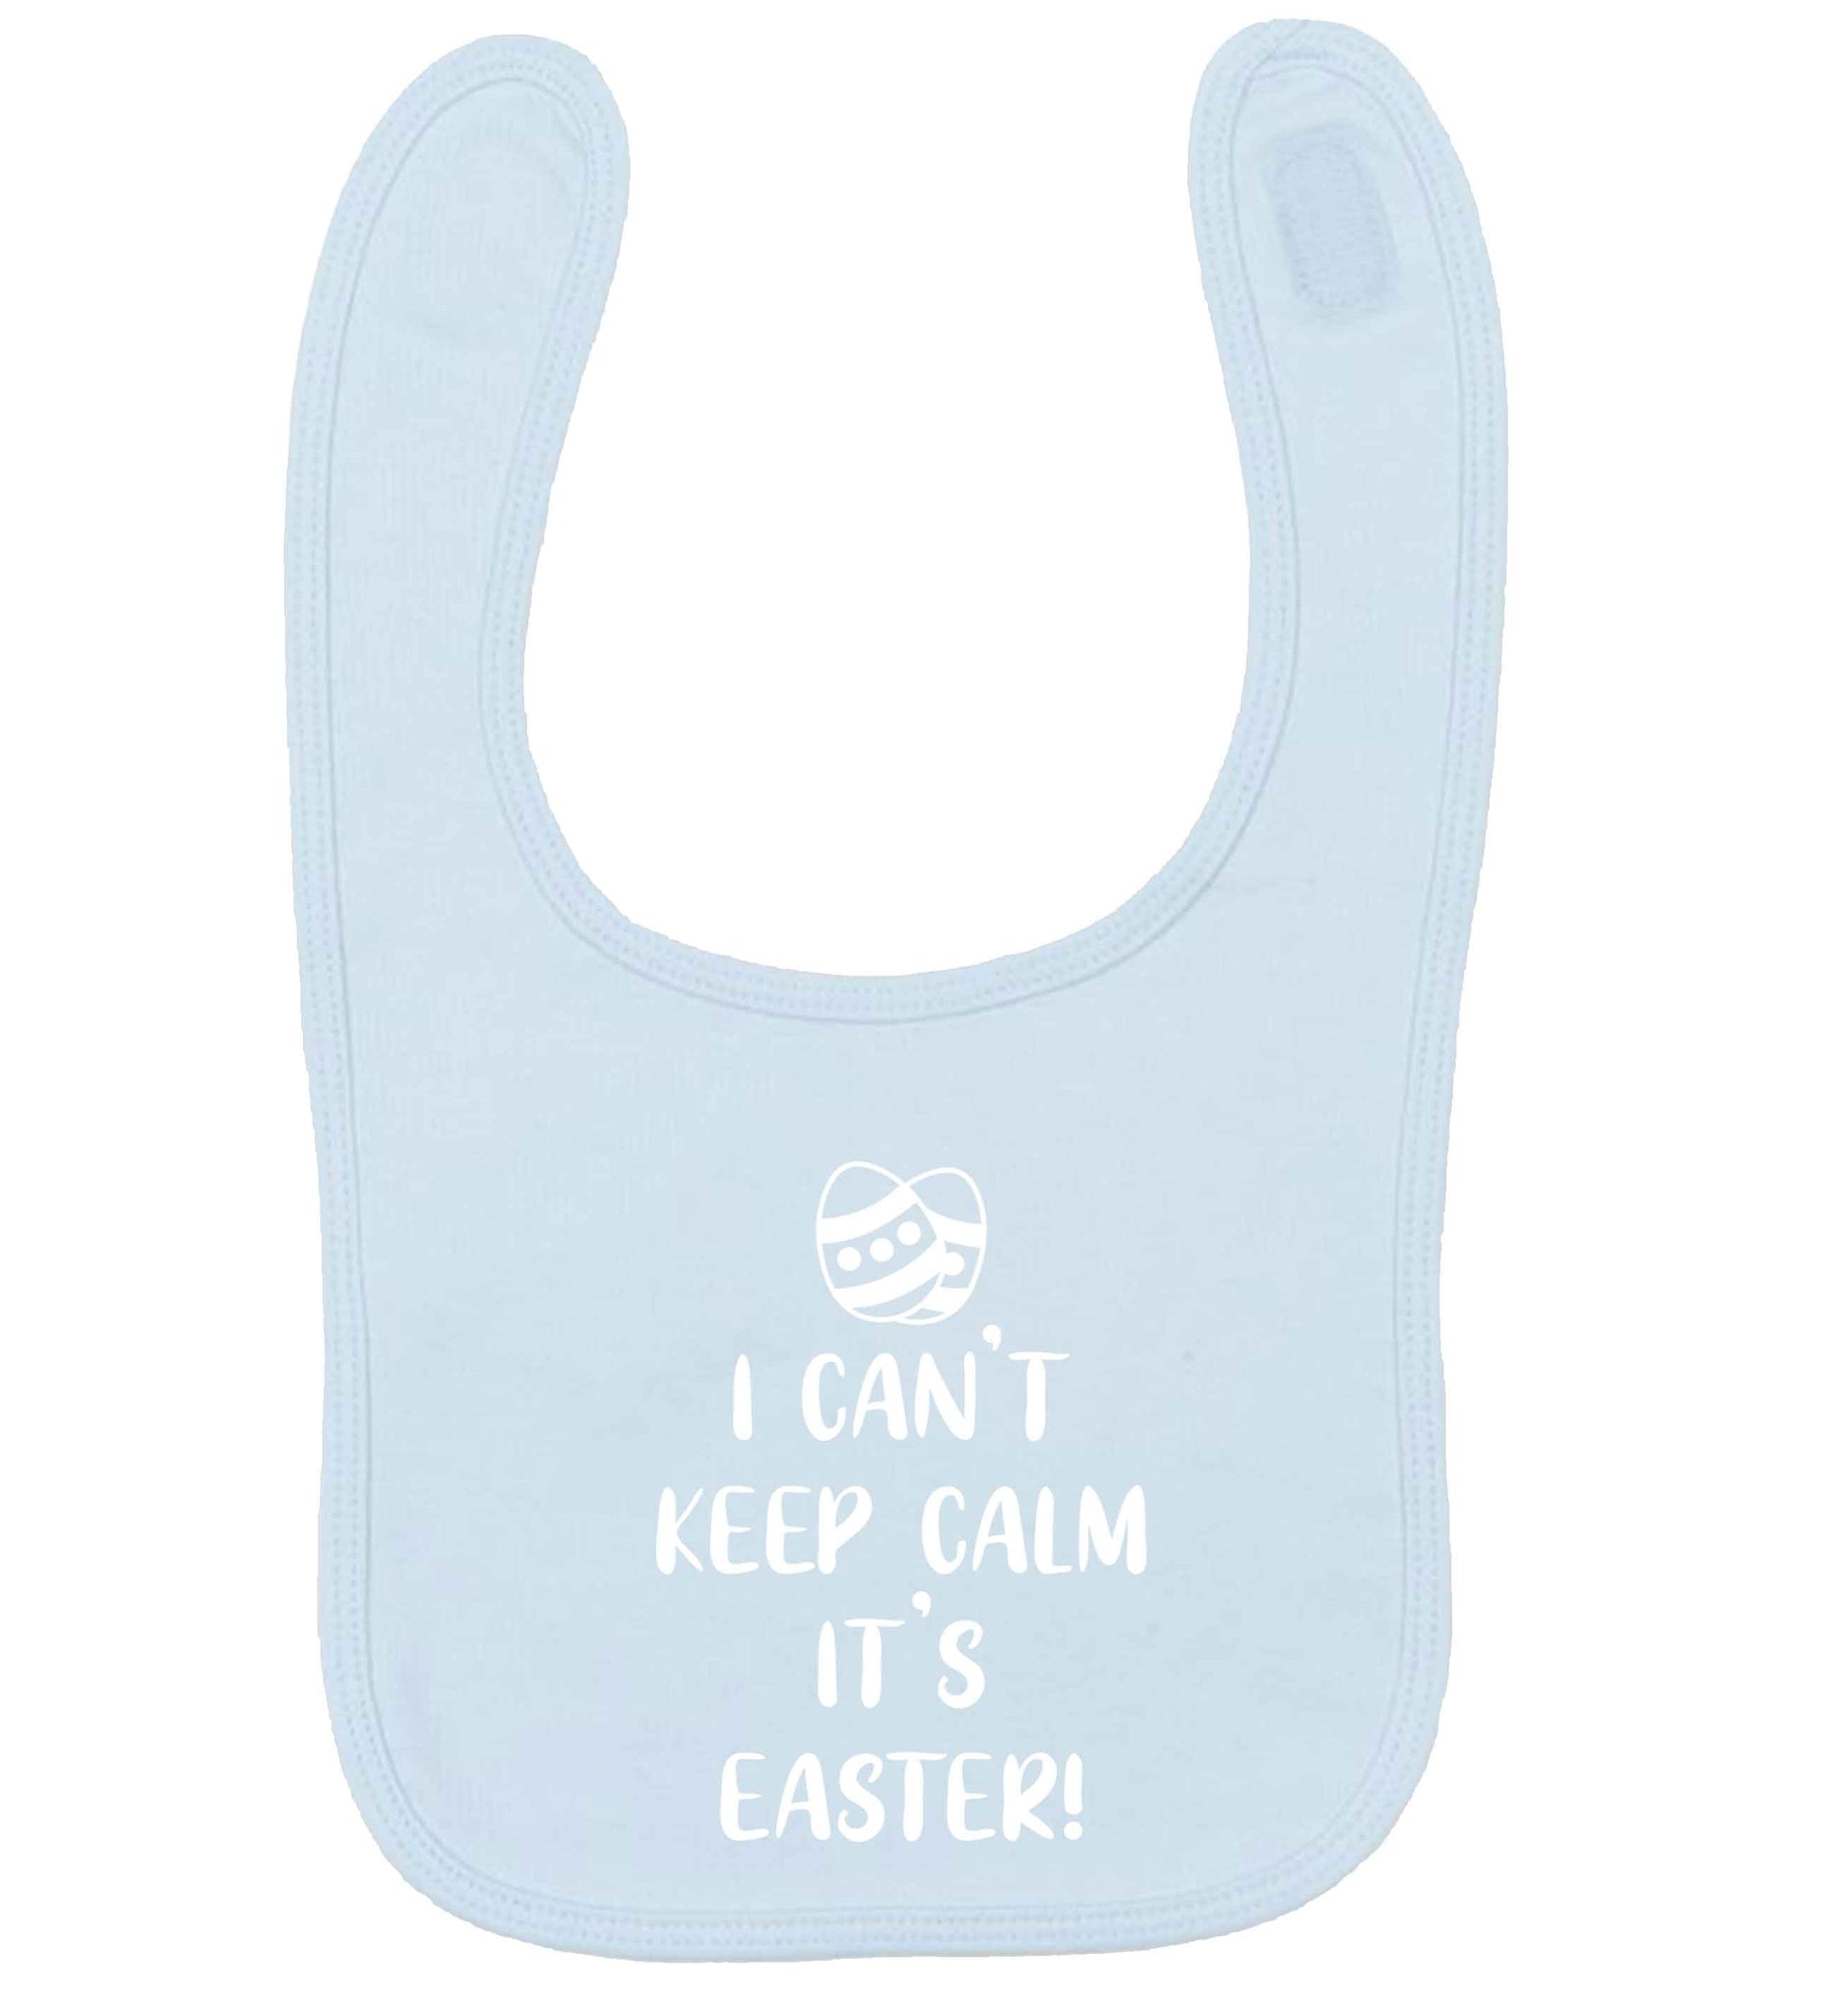 I can't keep calm it's Easter pale blue baby bib